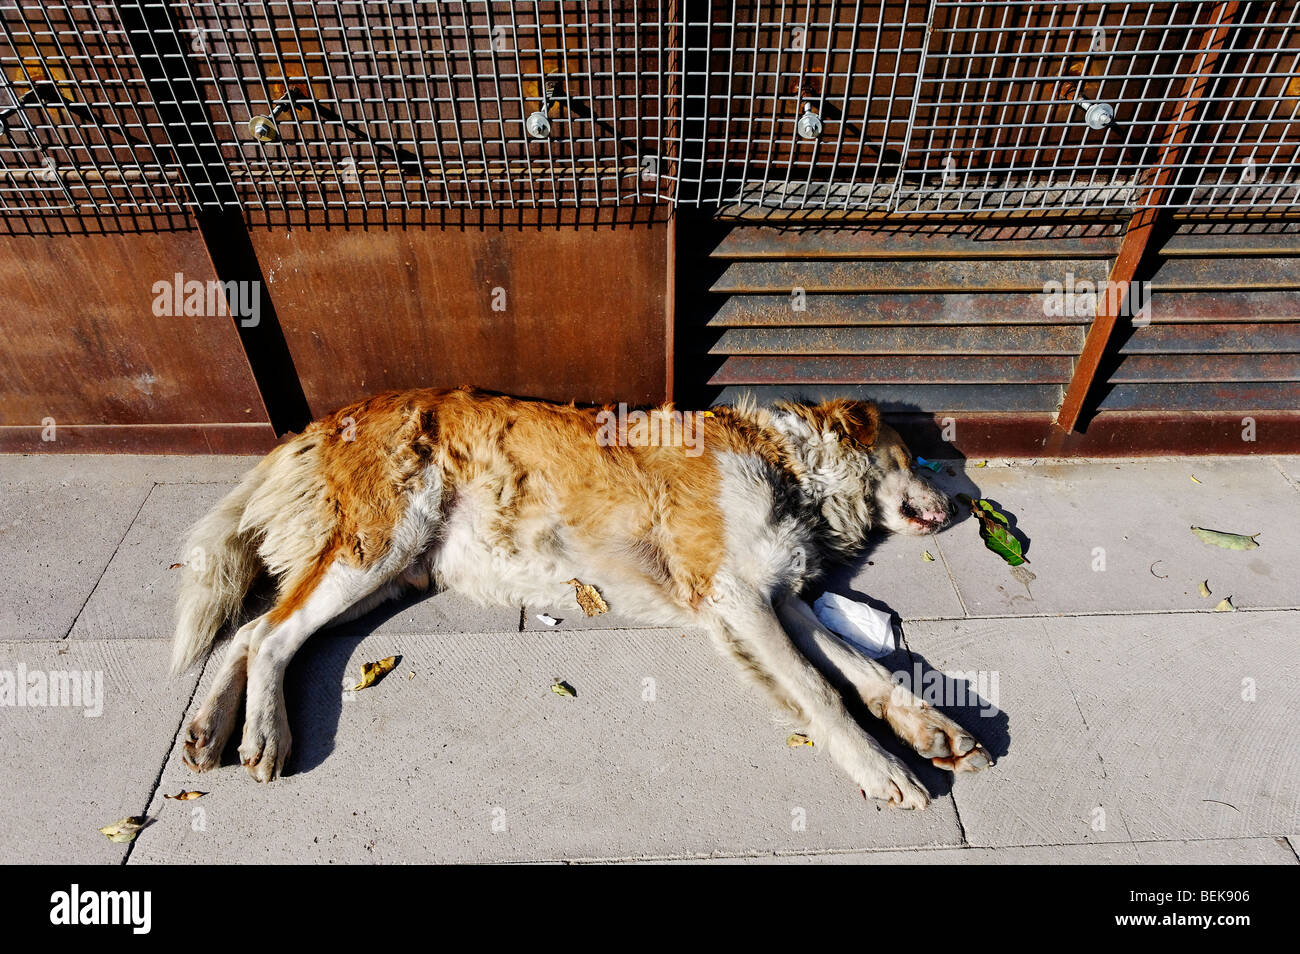 Stray dog sleeping among litter in a city street Stock Photo